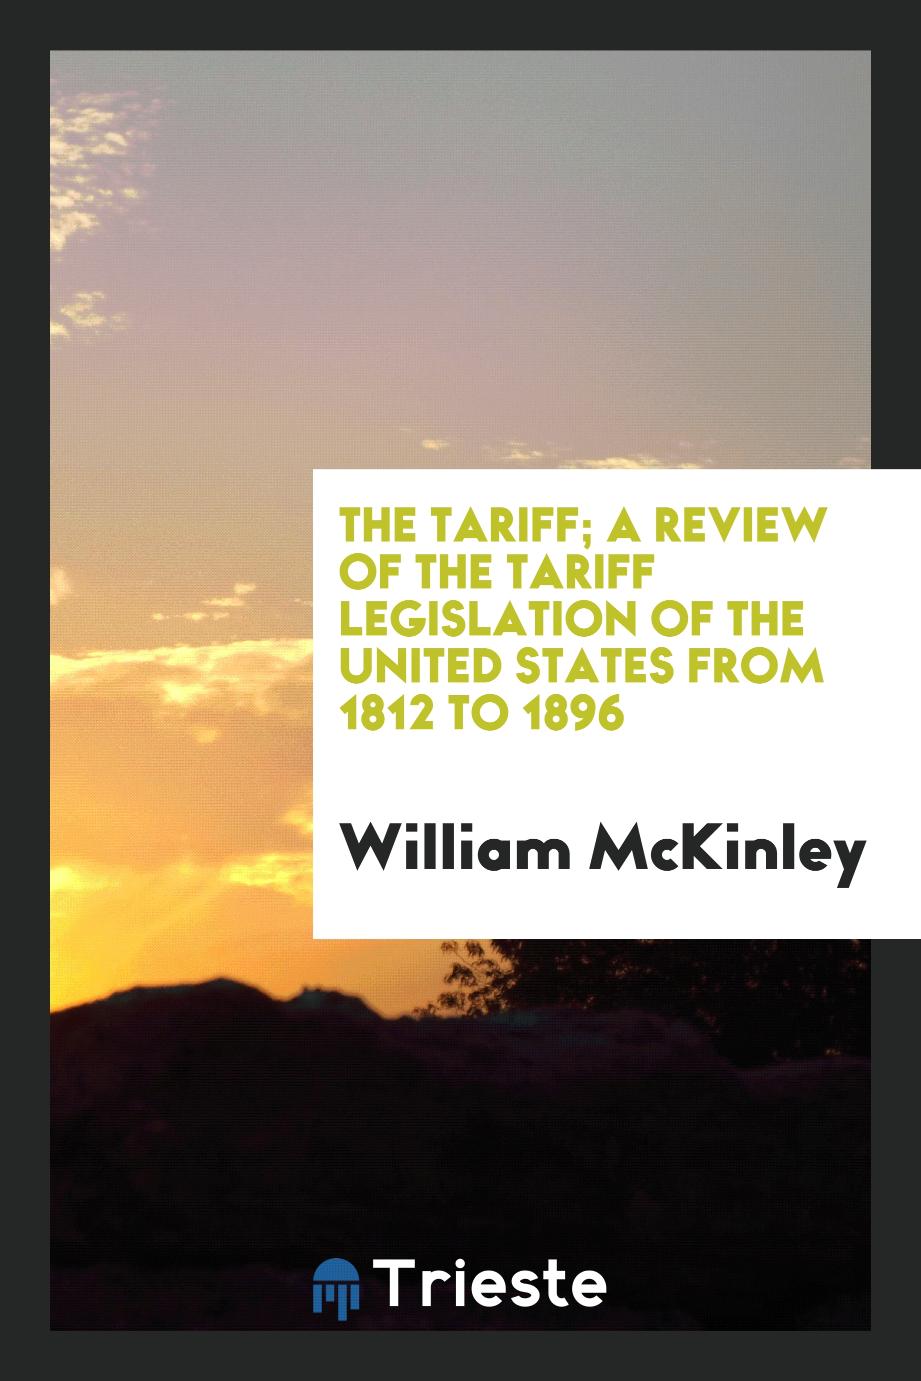 The tariff; a review of the tariff legislation of the United States from 1812 to 1896